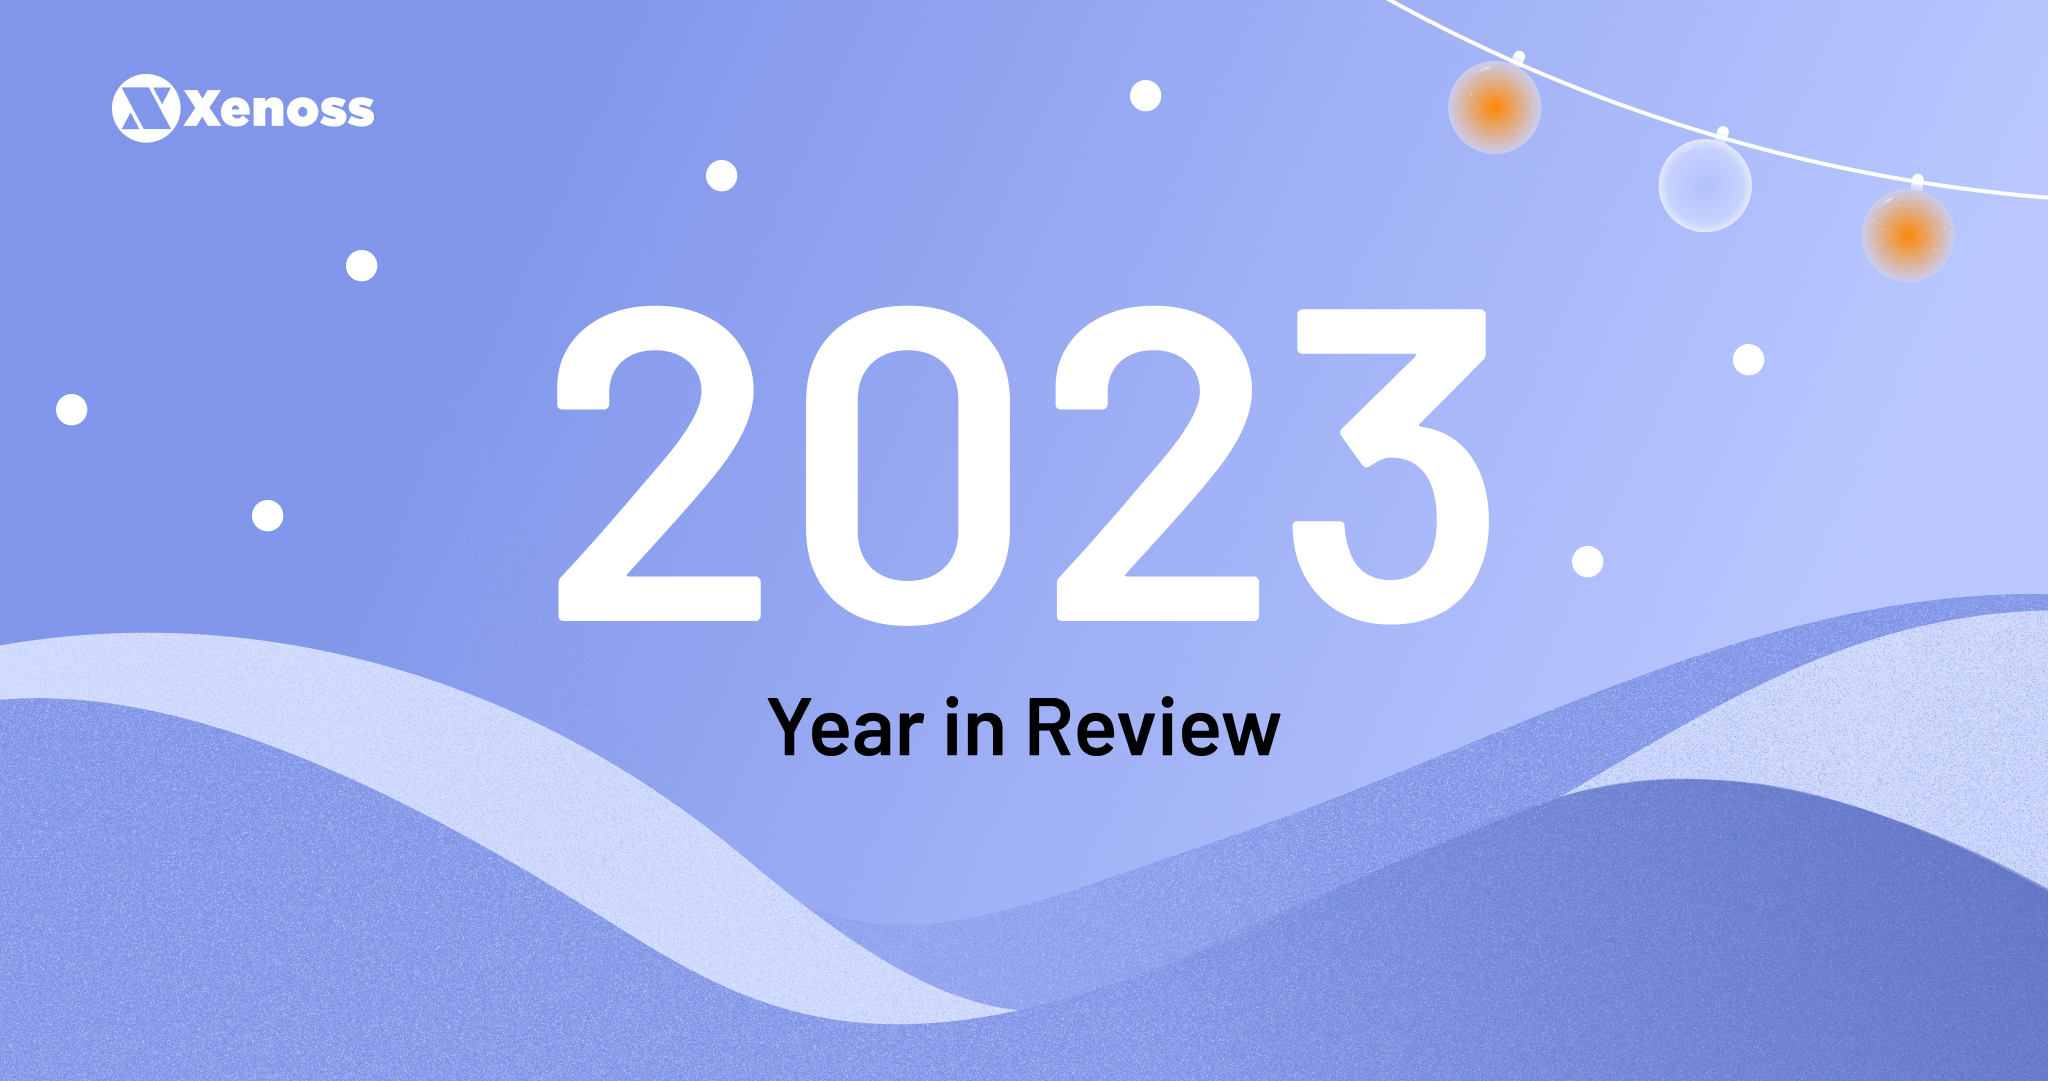 Xenoss year in review 2023